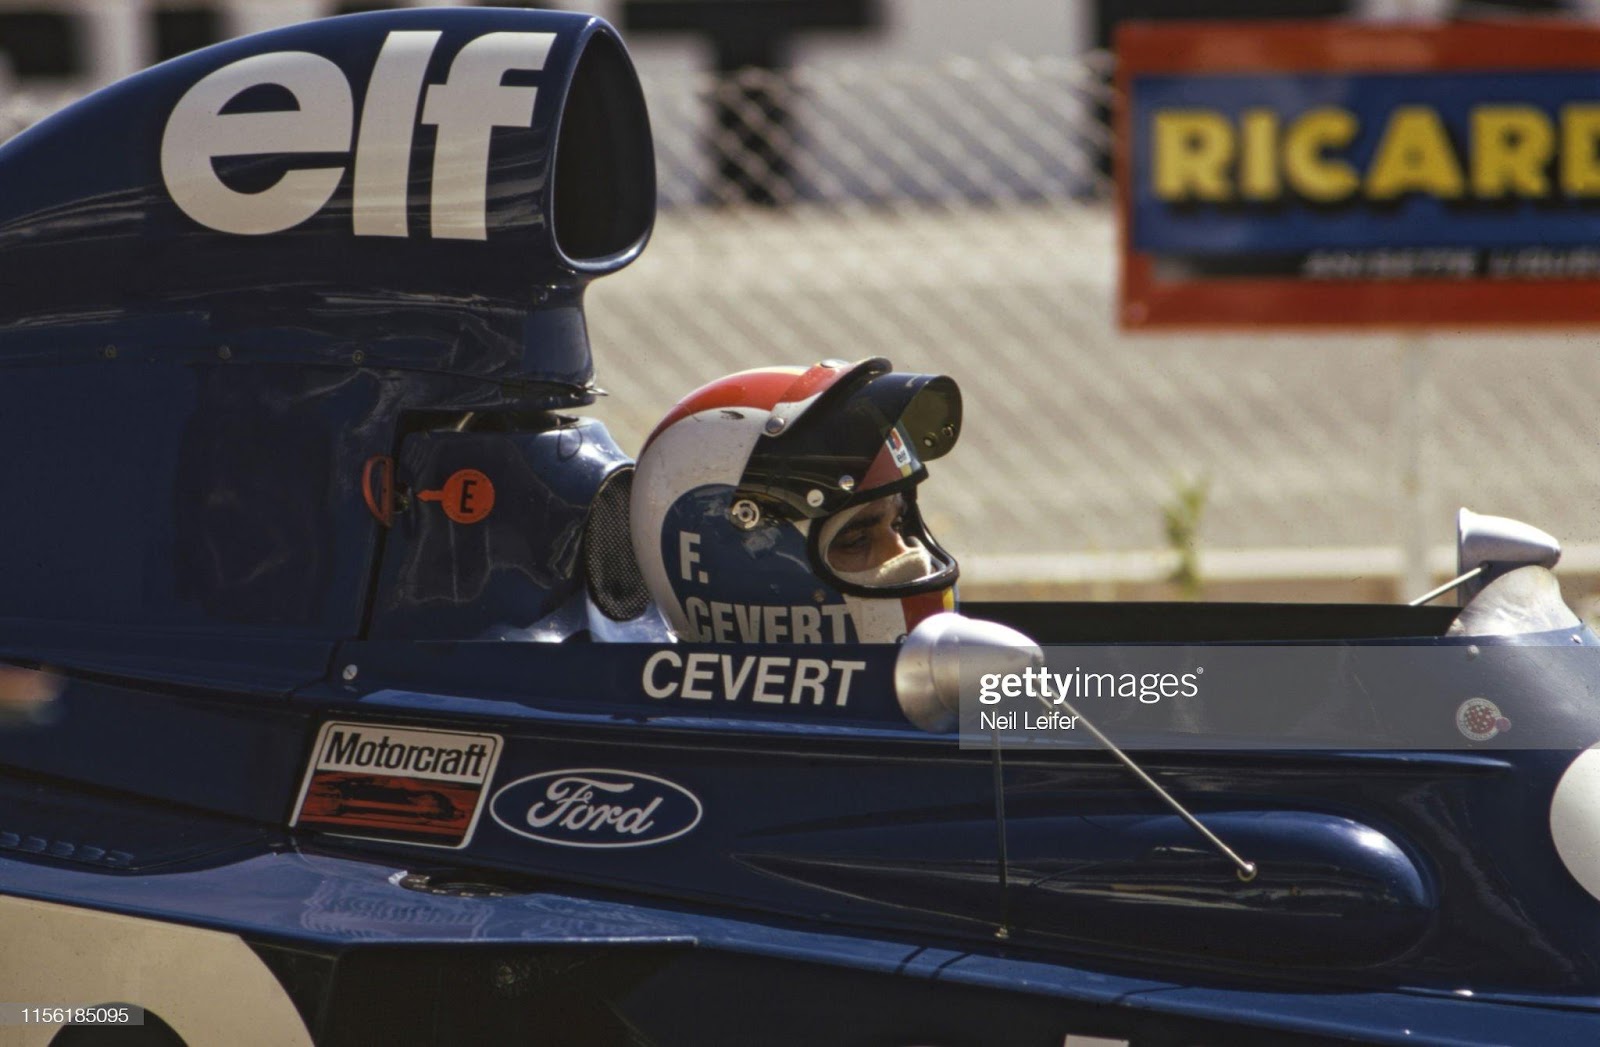 Portrait of François Cevert in car before race at the French Grand Prix at Circuit Paul Ricard, Le Castellet, France, on April 06, 1973.